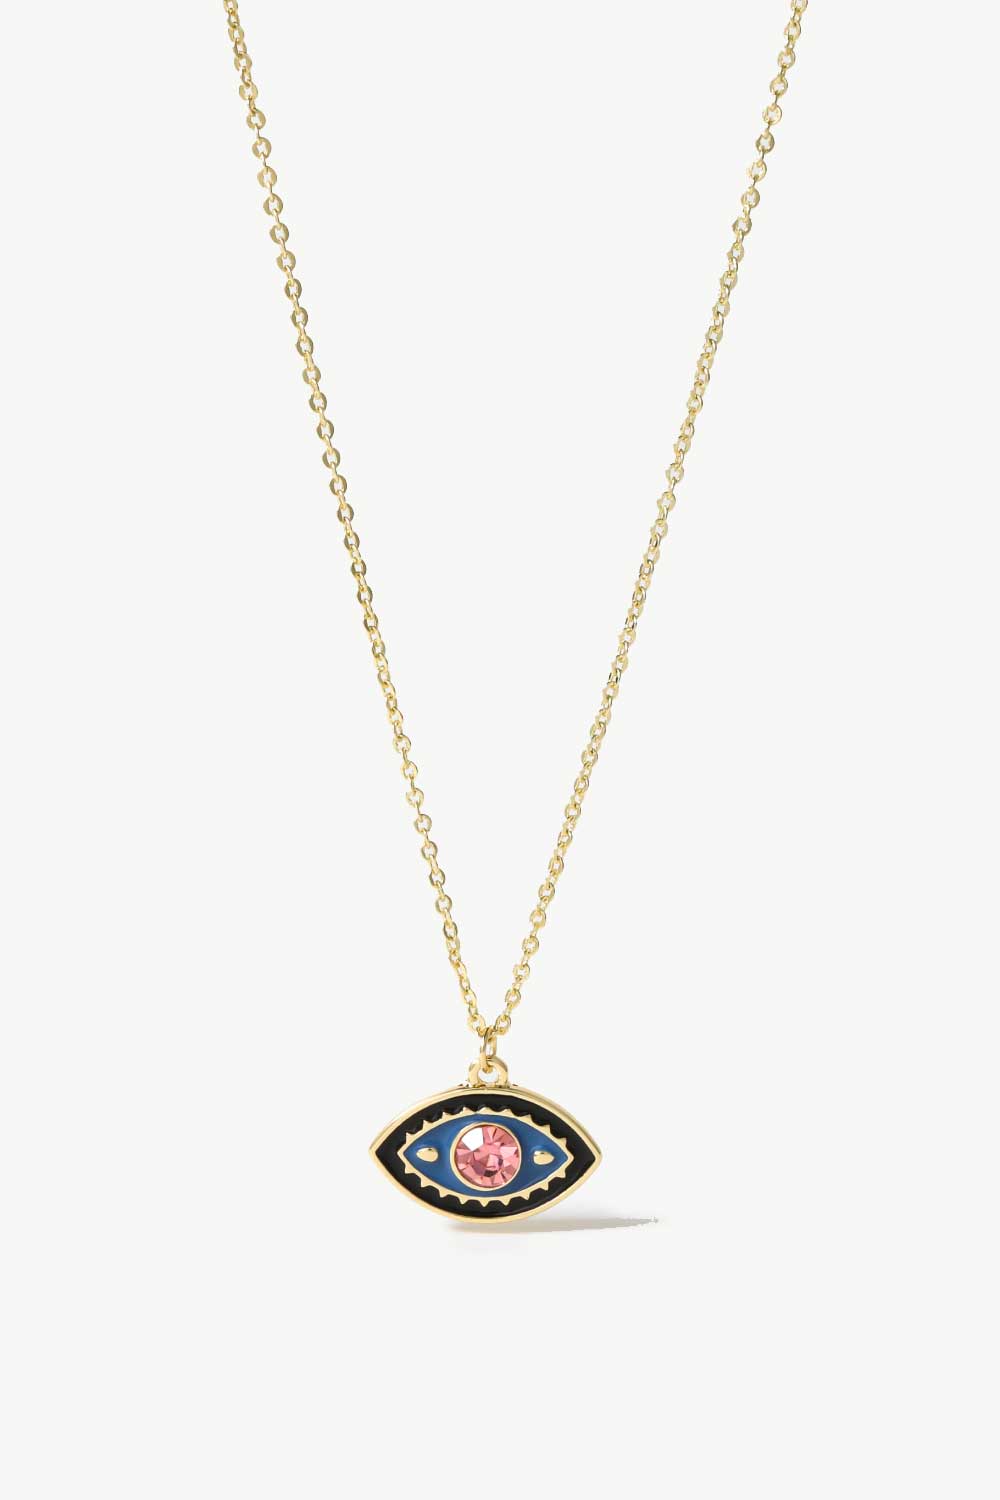 Evil Eye Pendant Gold Plated Chain Necklace - Necklaces - FITGGINS